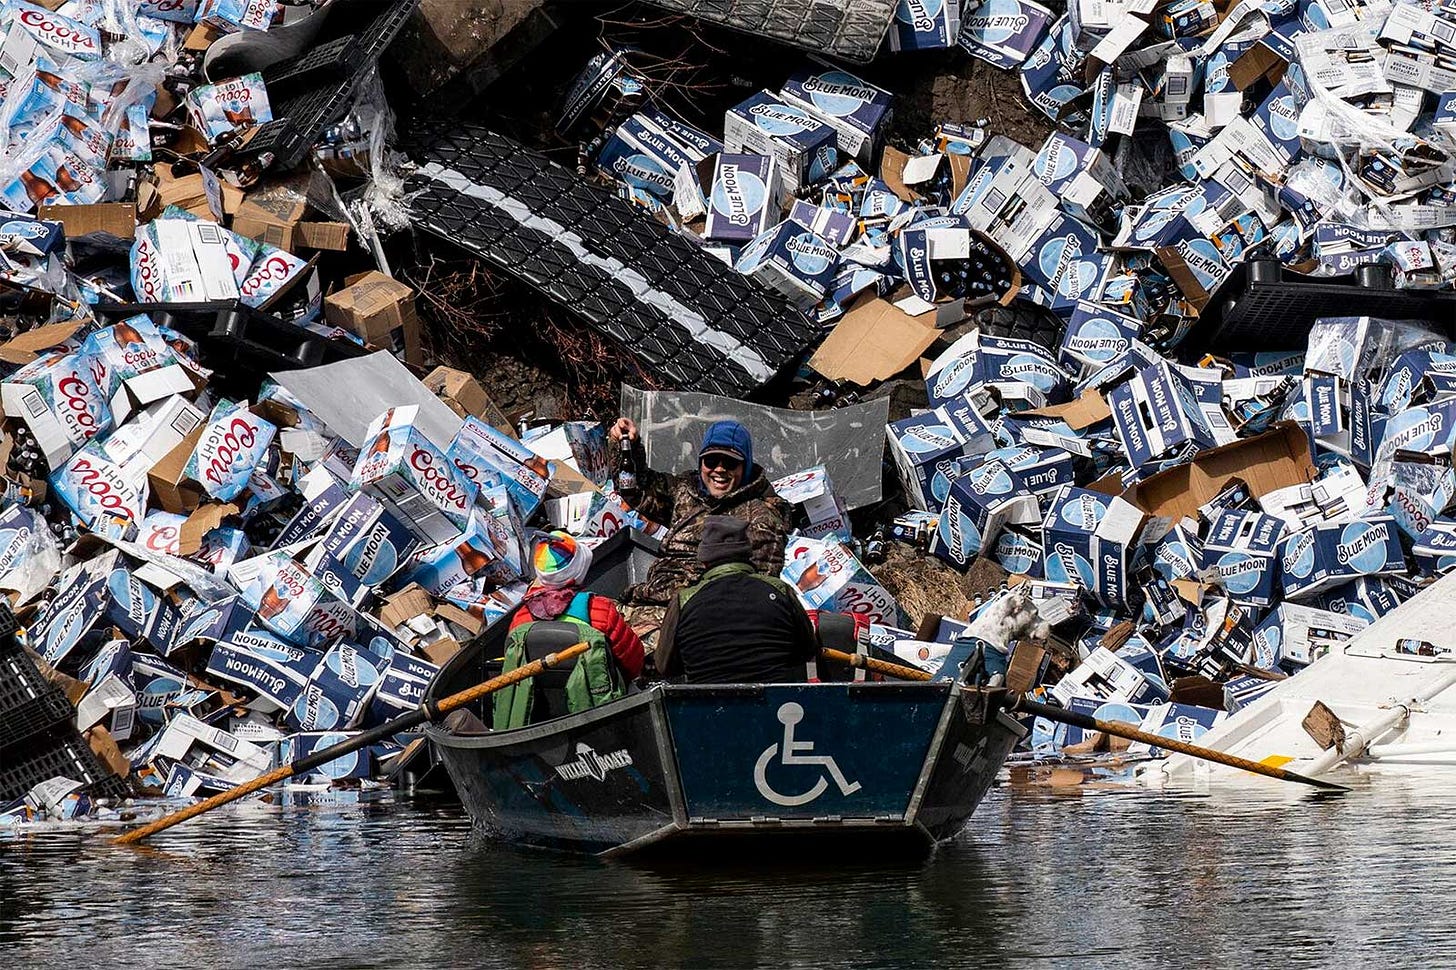 A group of anglers claim a bottle of Coors Light from a derailed railcar on the banks of a river.